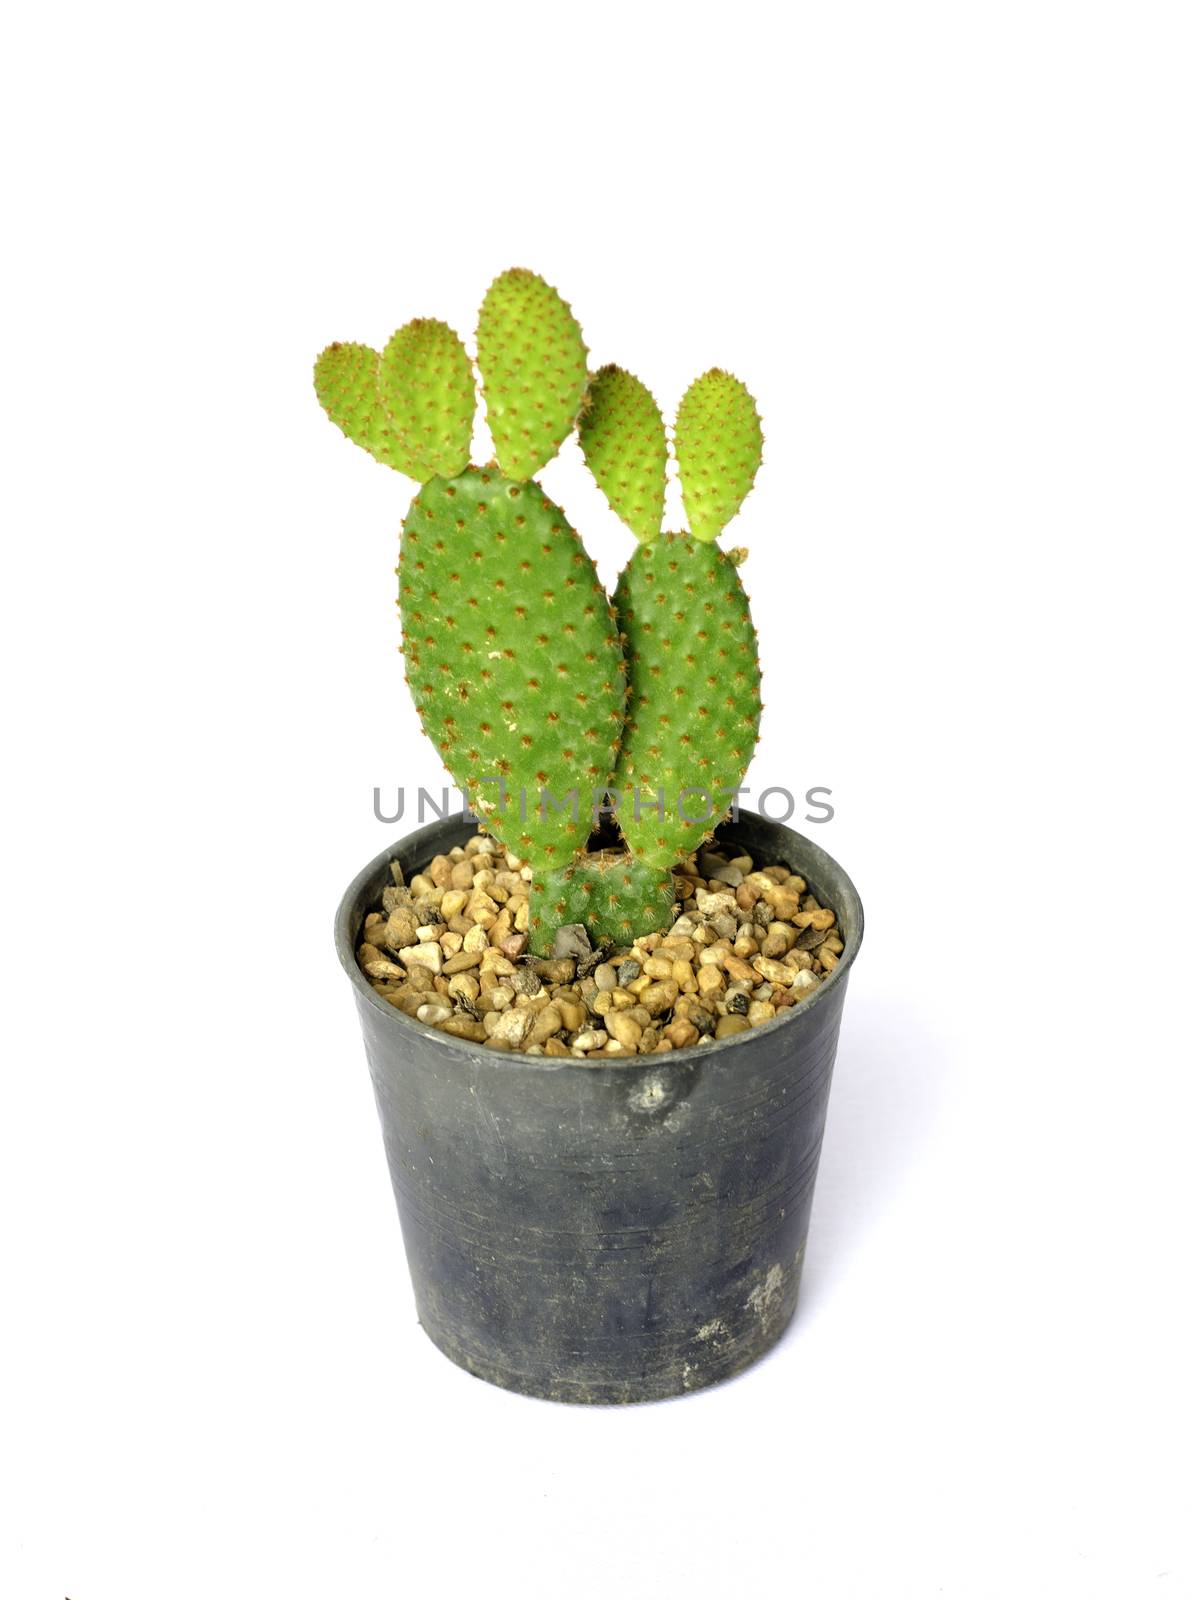 Bunny ears cactus in a pot. on white by siraanamwong